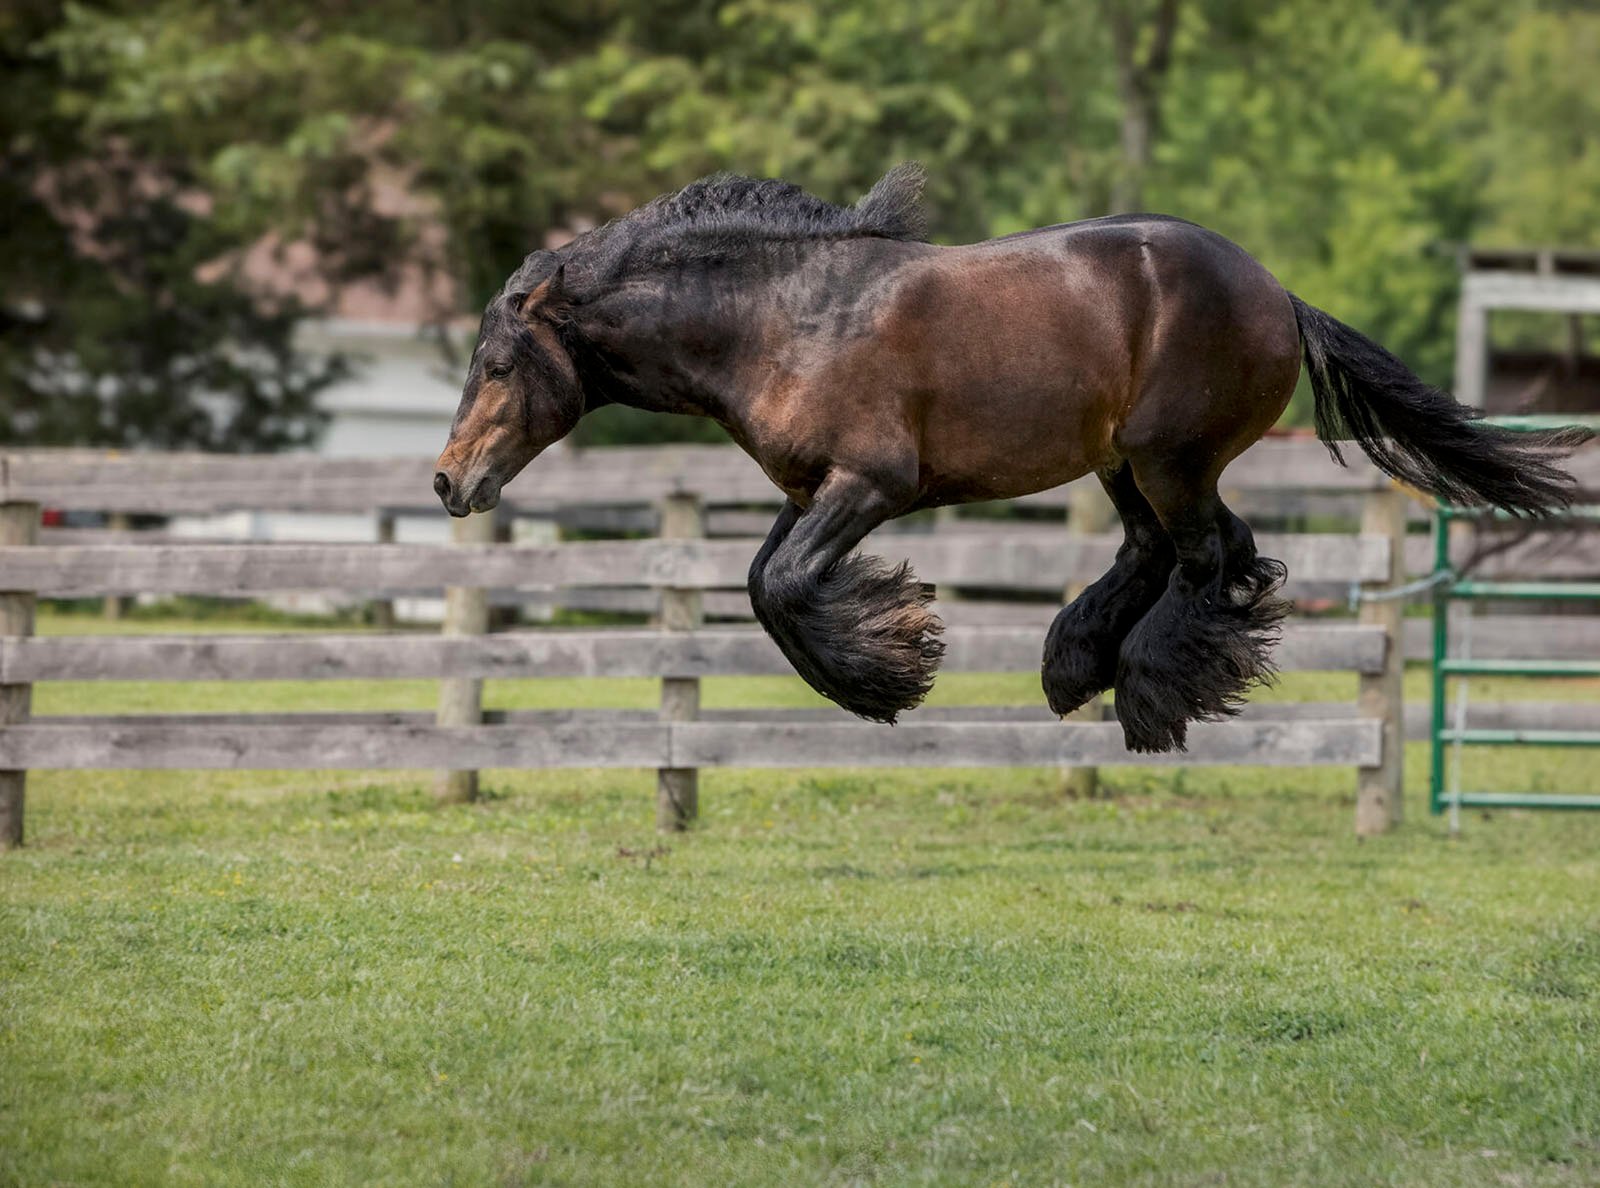 A dark brown horse with flowing black mane and tail, mid-leap over a grassy field, showcasing muscular strength and agility, with a blurred fence and trees in the background.